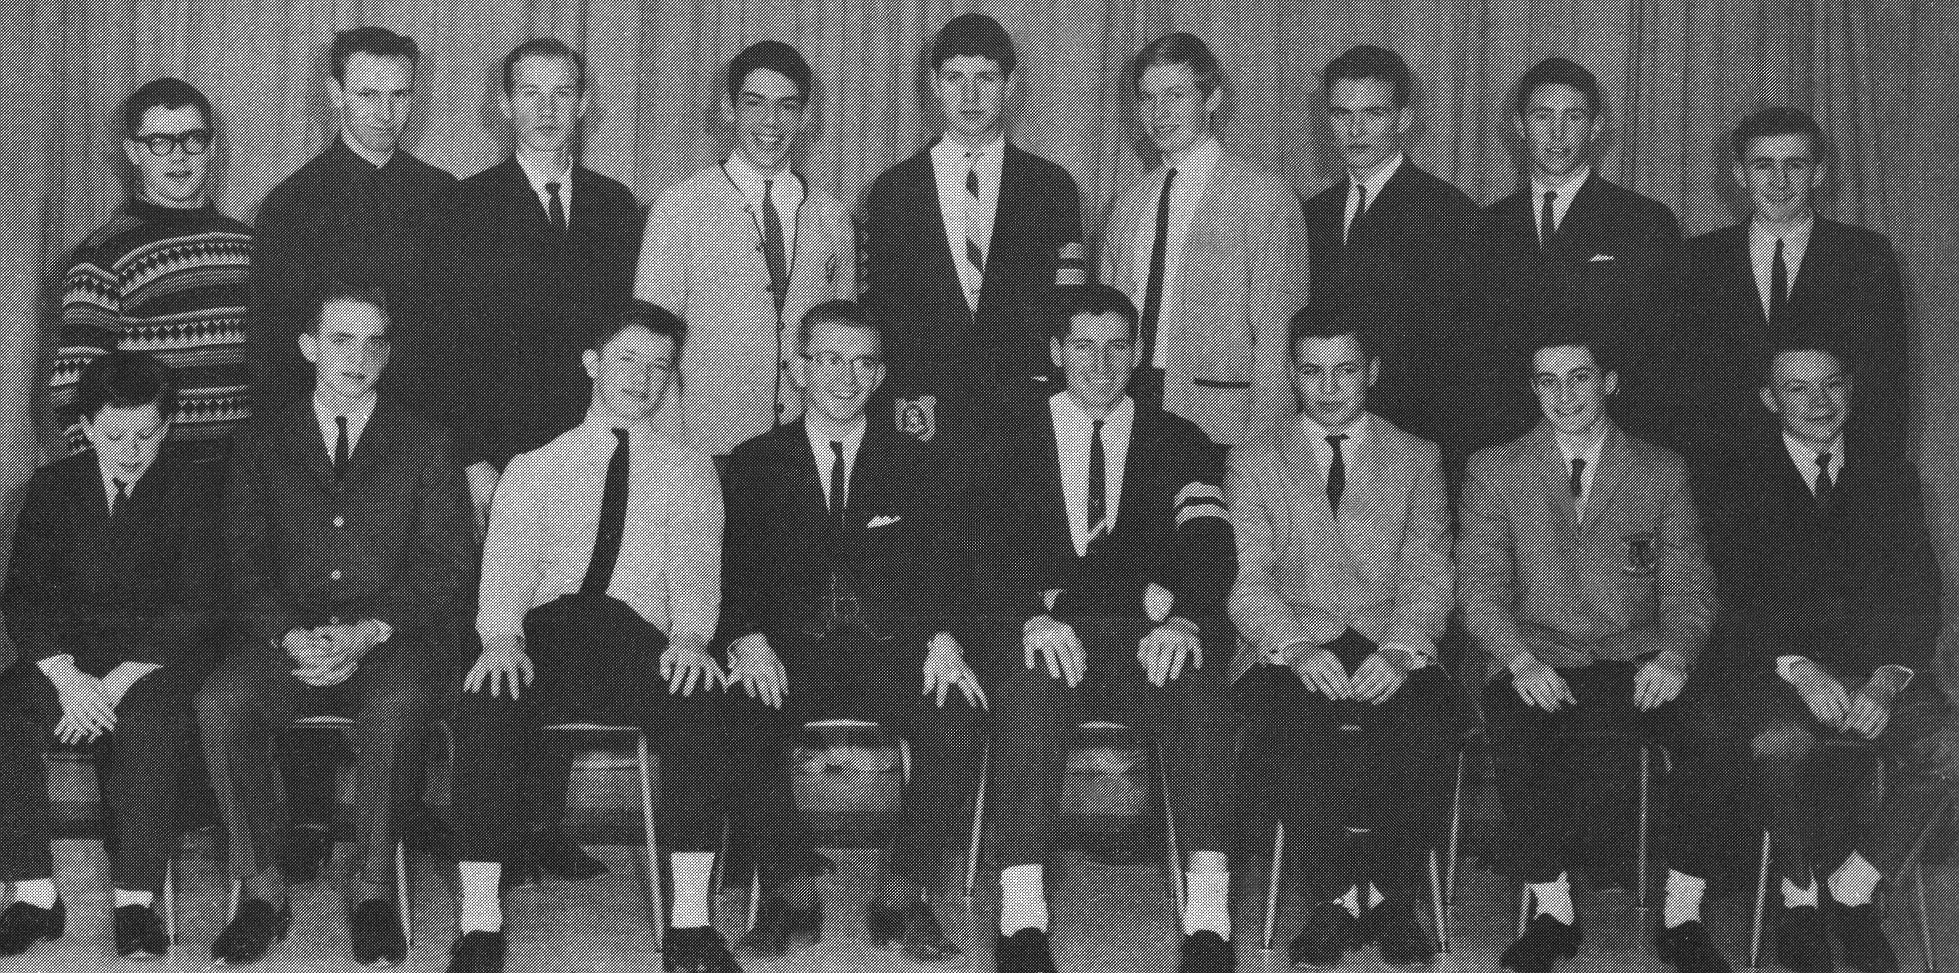 (Click to magnify) FRONT ROW: Brian Heddle, S. Harrison, B. Sanderson, D. Lyons, Rich Lunney, B. Waller, Wayne Foote, Ivan Geer; SECOND ROW: Jed Stonehouse, Ron May, Mike Lunney, Brian St.John, Bob Morden, Sandy Williamson, Bob Seaman, Doug Barton, Trevor